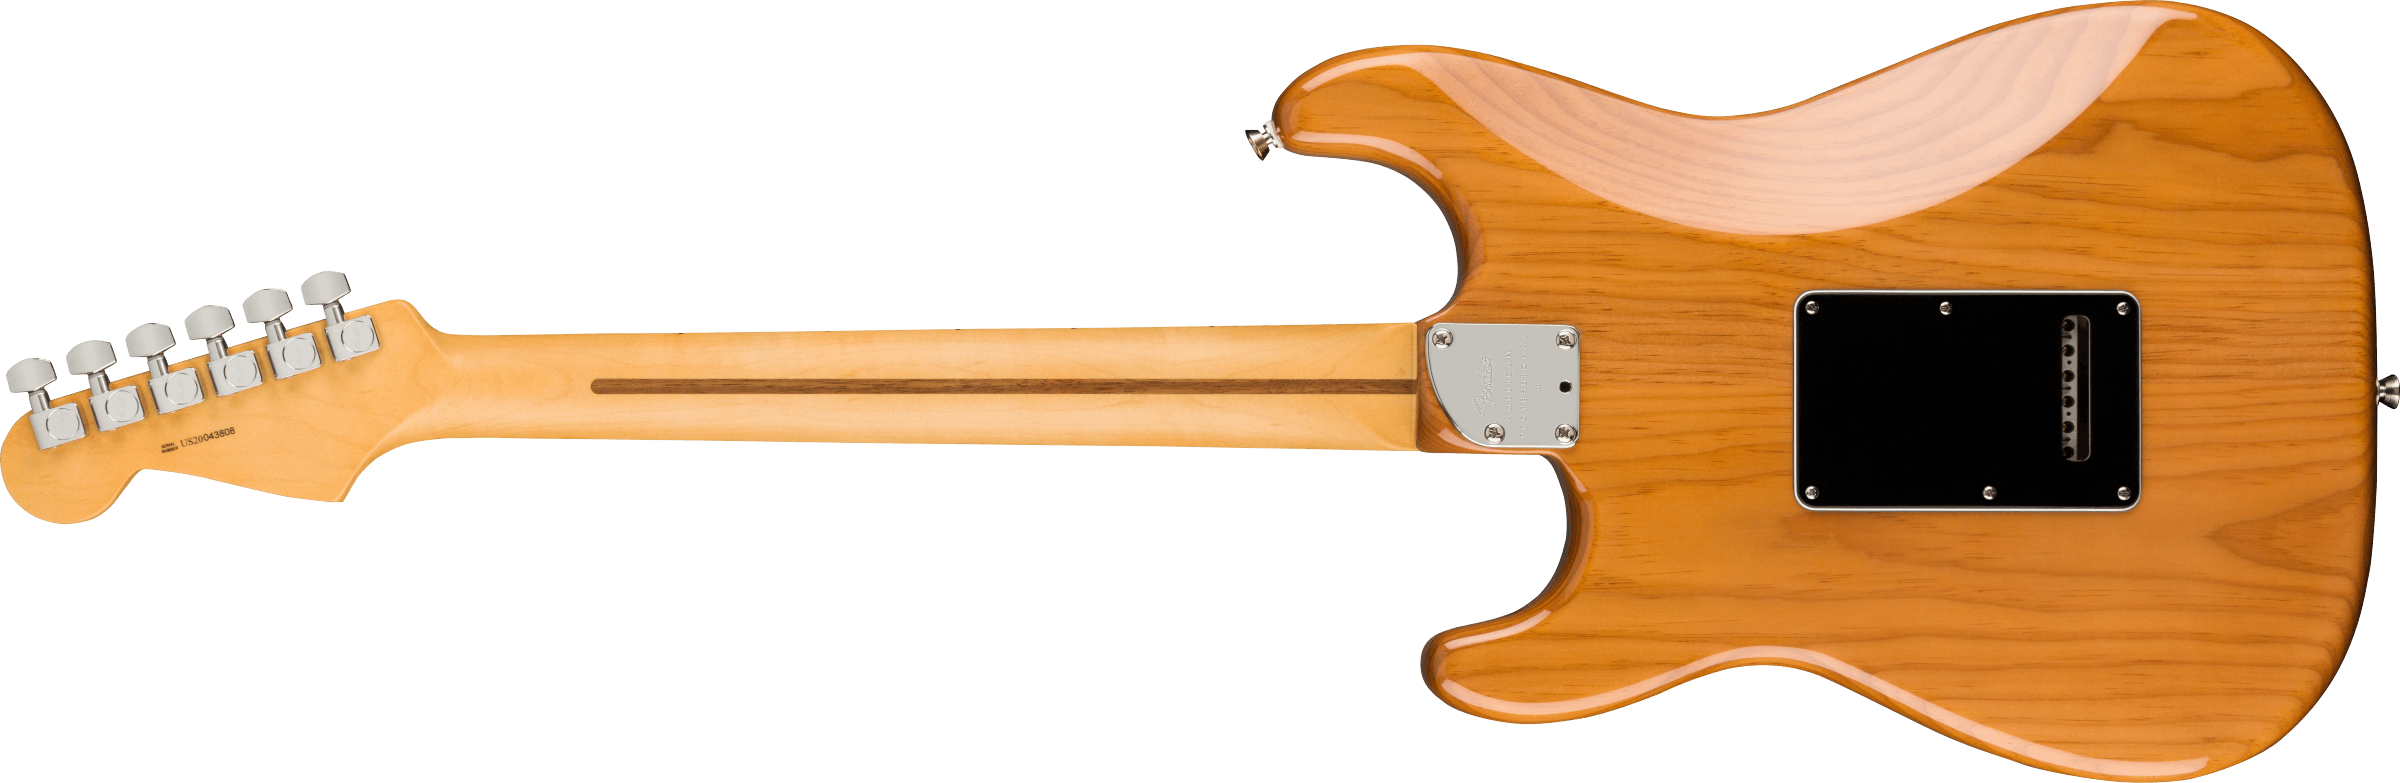 Fender American Professional II Stratocaster HSS Maple Fingerboard Roasted Pine F-0113912763 SERIAL NUMBER US22177129 - 7.0 LBS